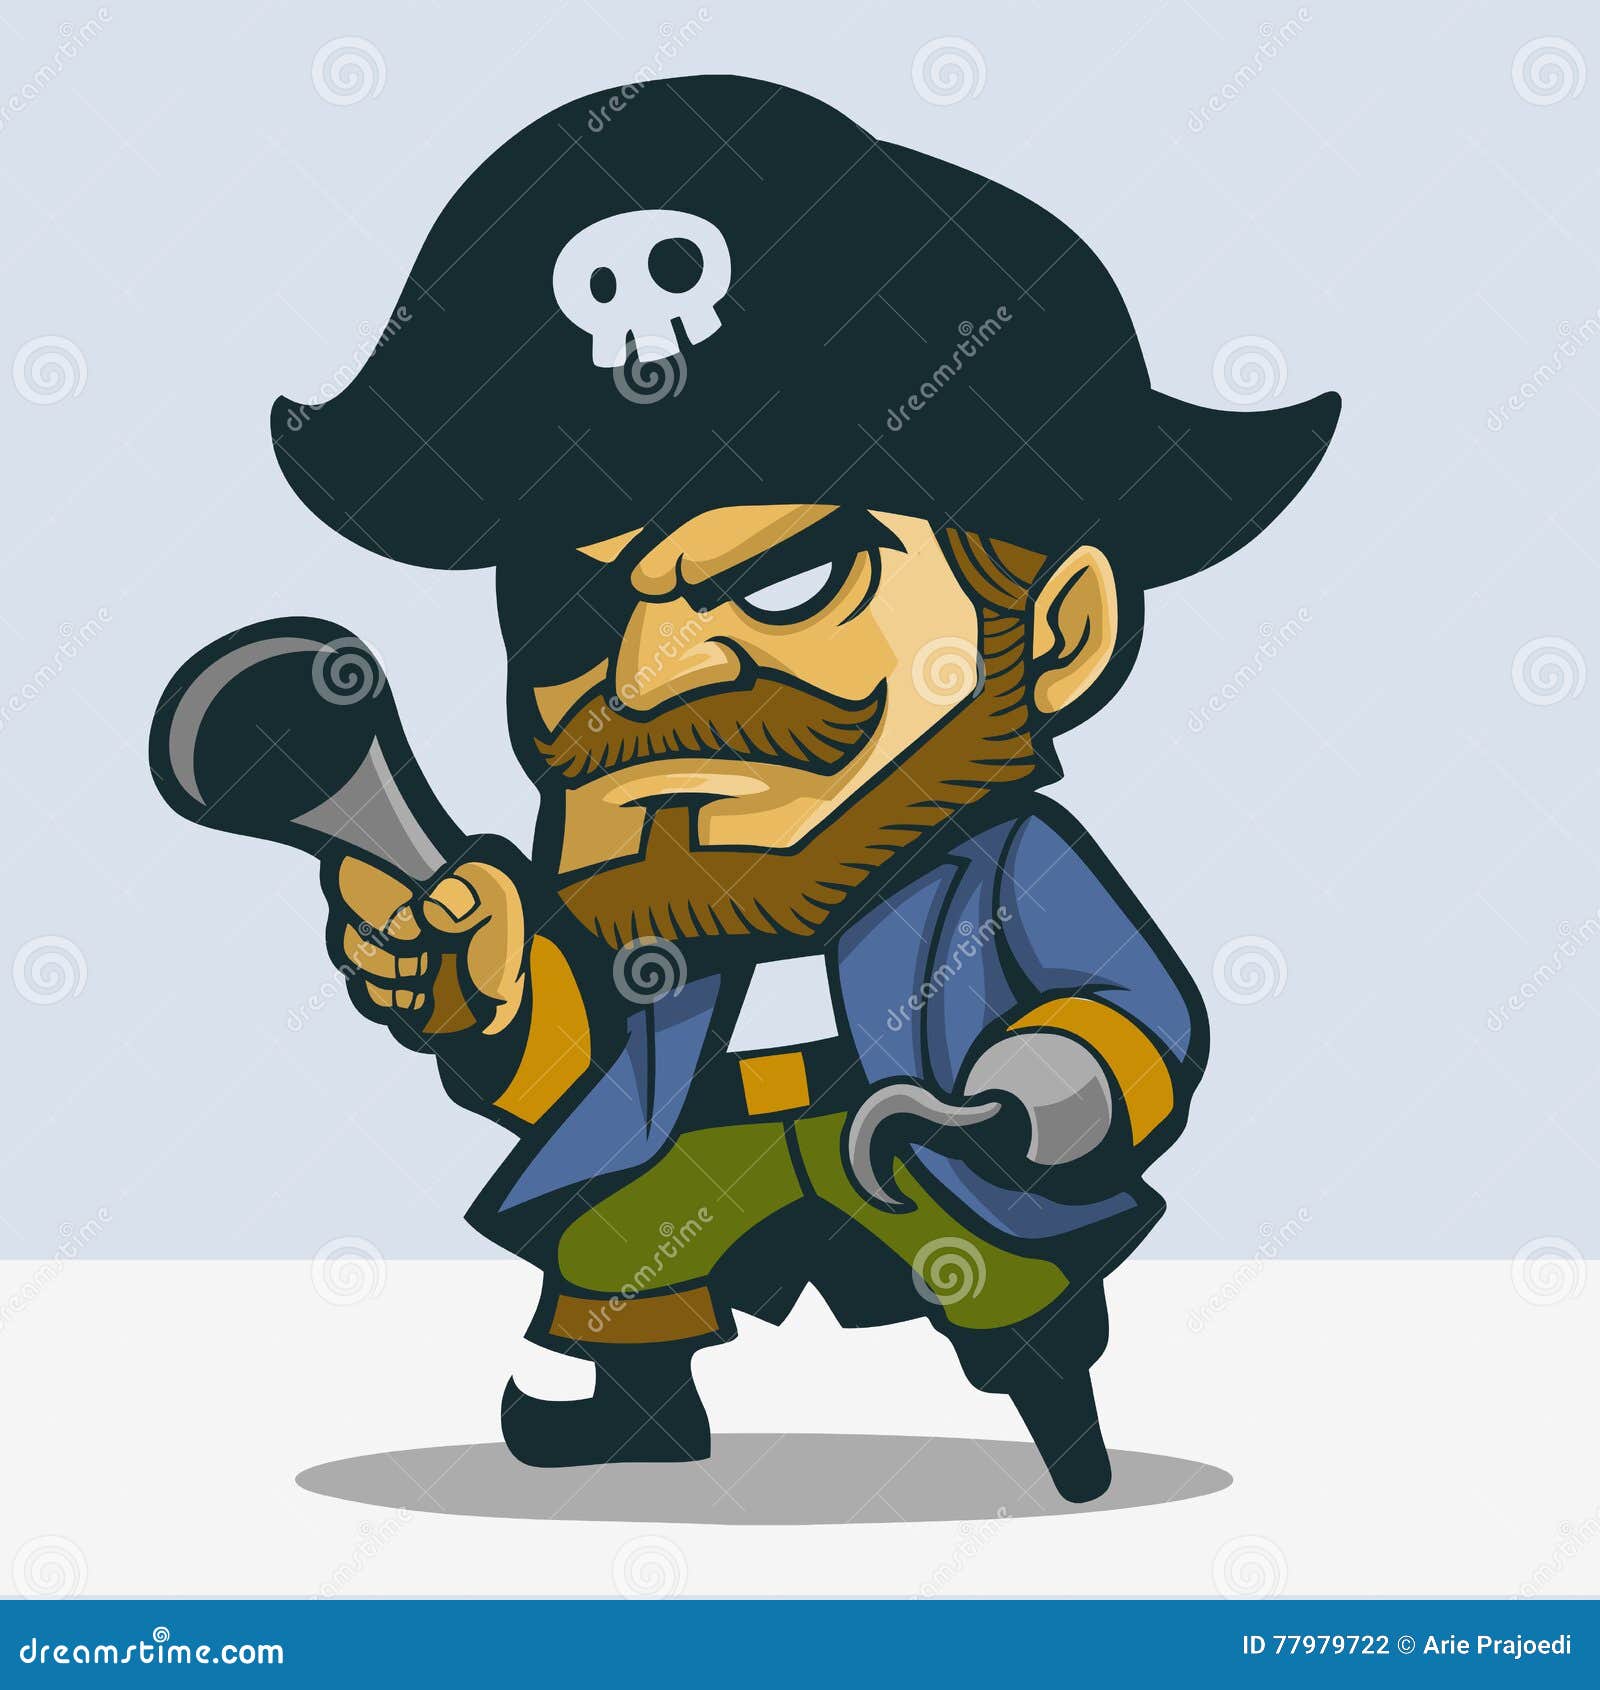 Cute Pirate stock vector. Illustration of scary, mascot - 77979722